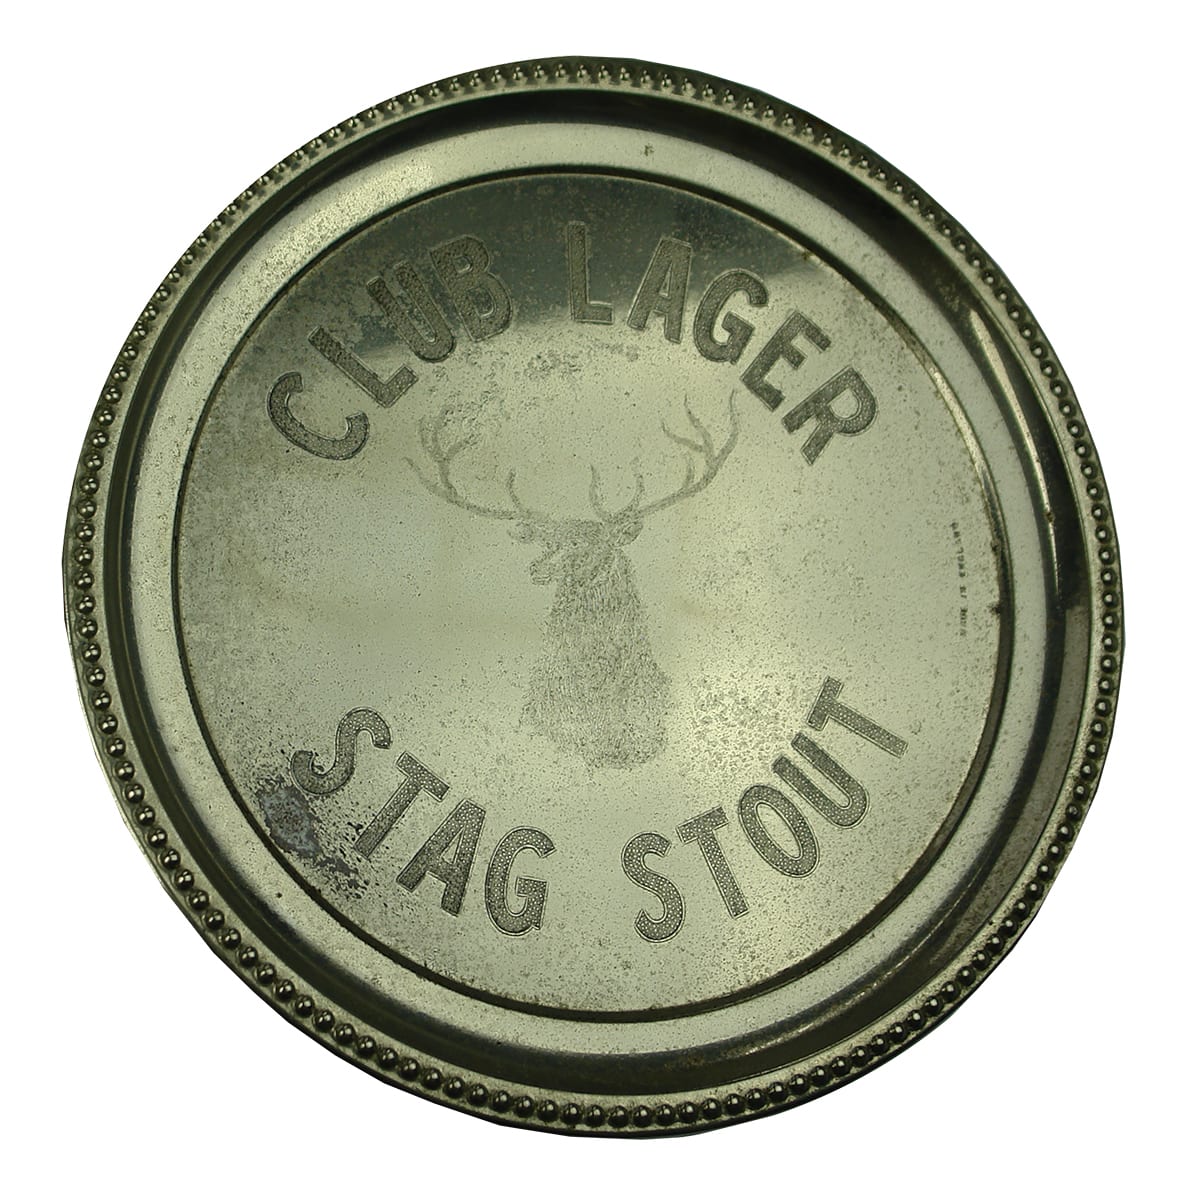 Advertising Serving Tray. Club Lager, Stag Stout. (Sydney, New South Wales)